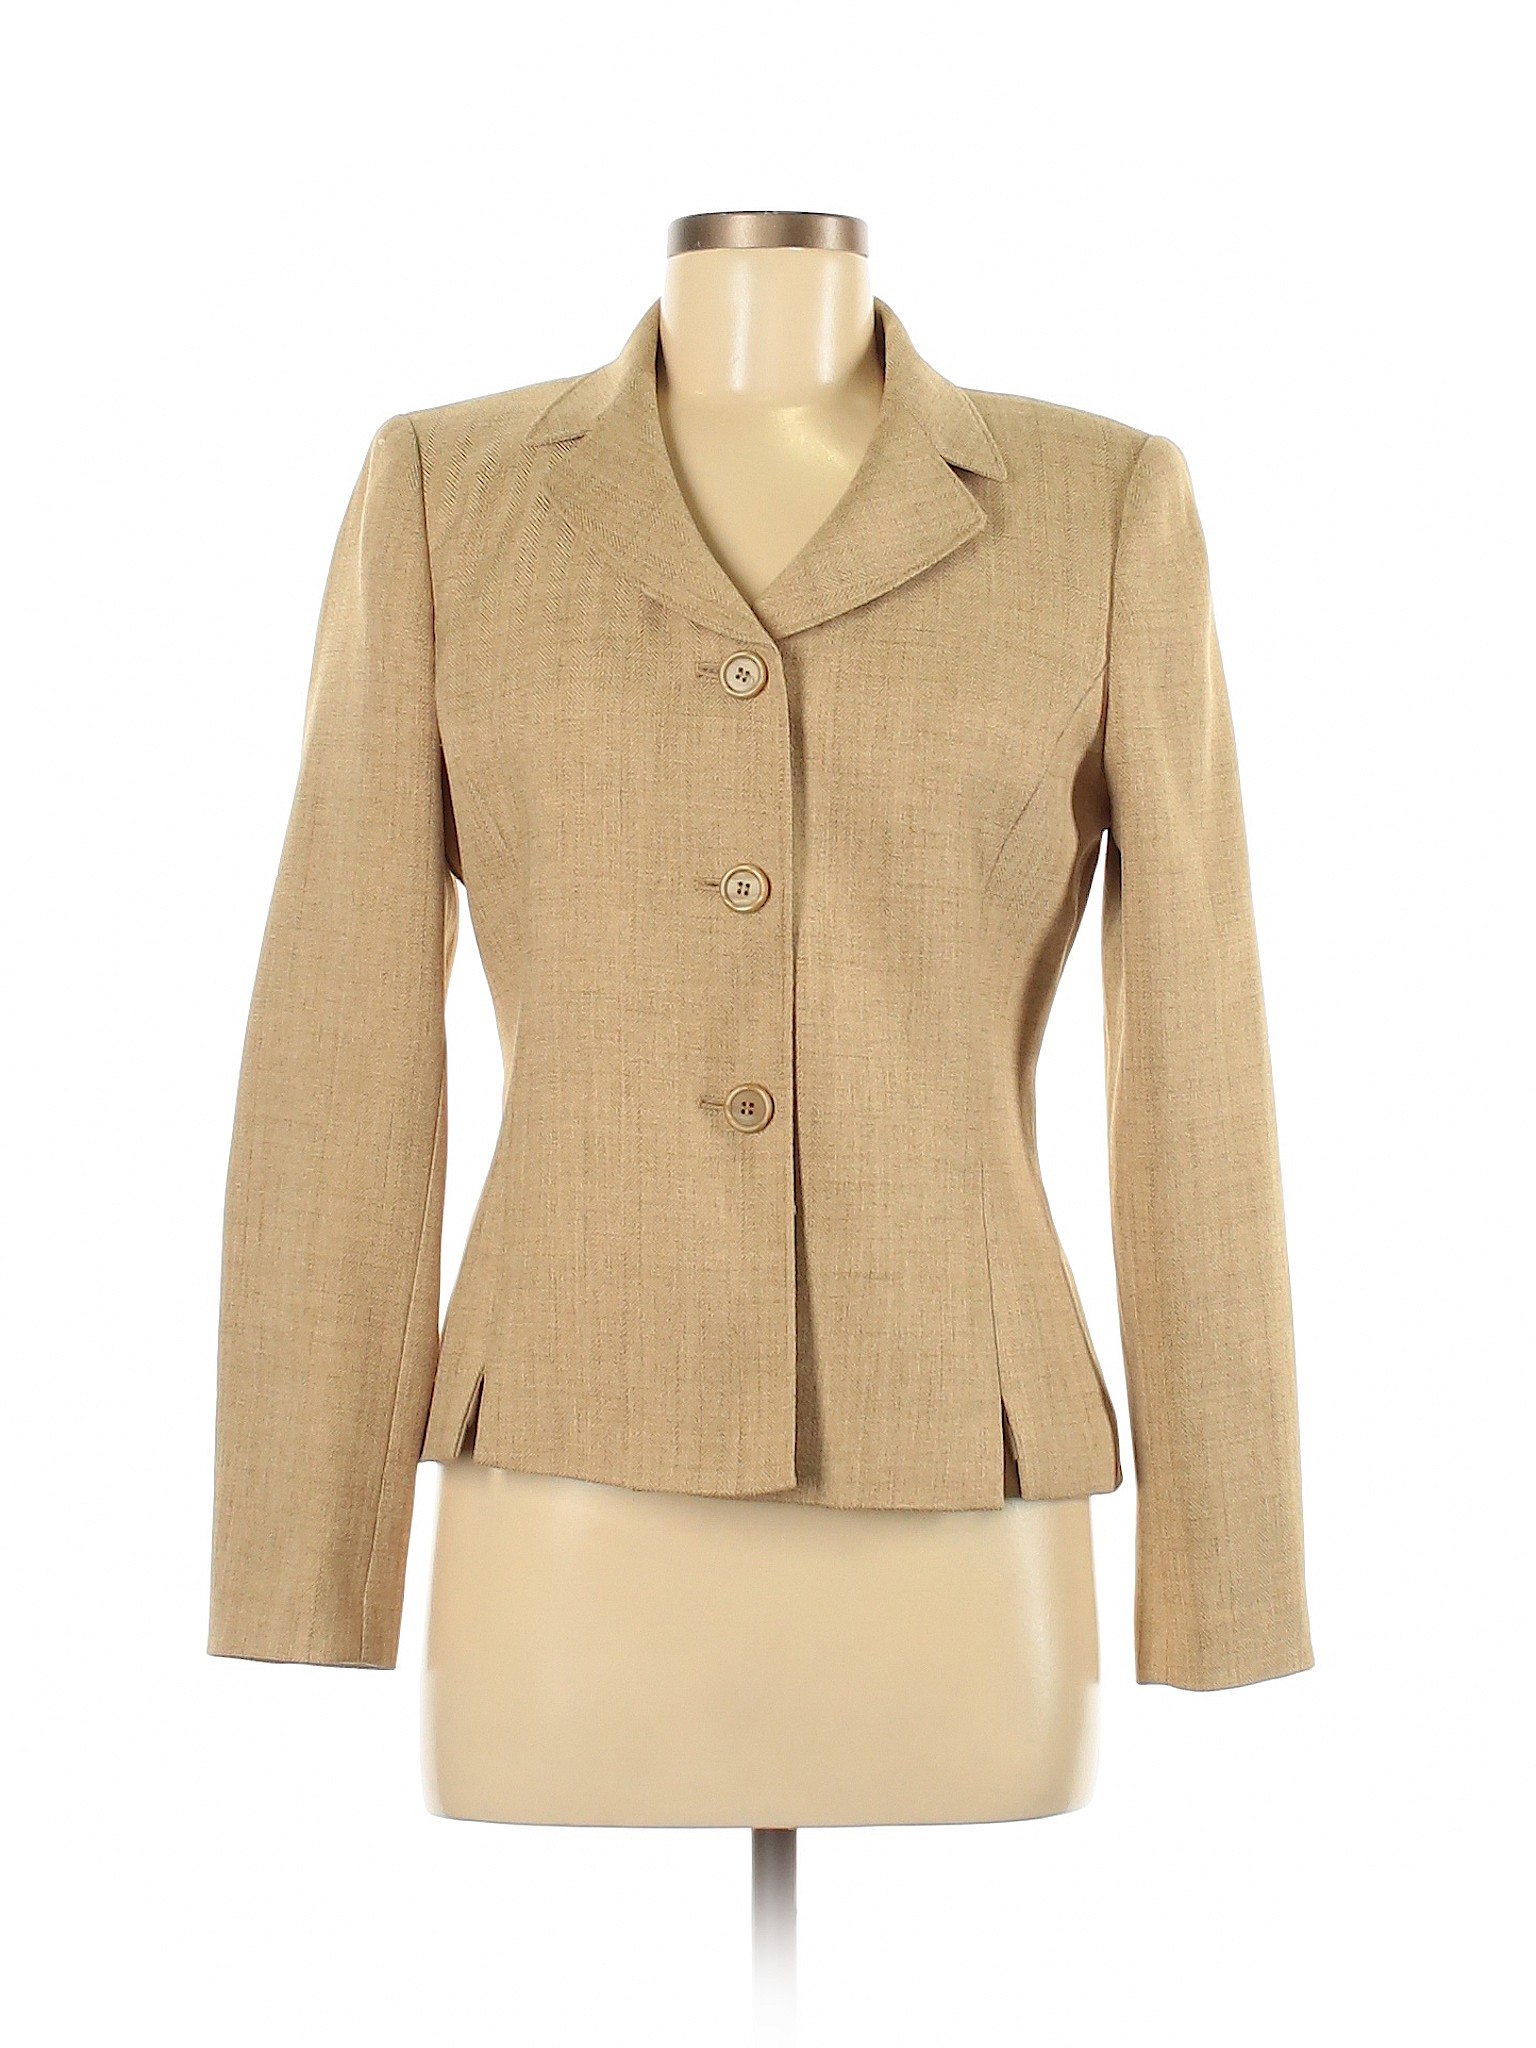 Collections for Le Suit Women Brown Blazer 6 | eBay